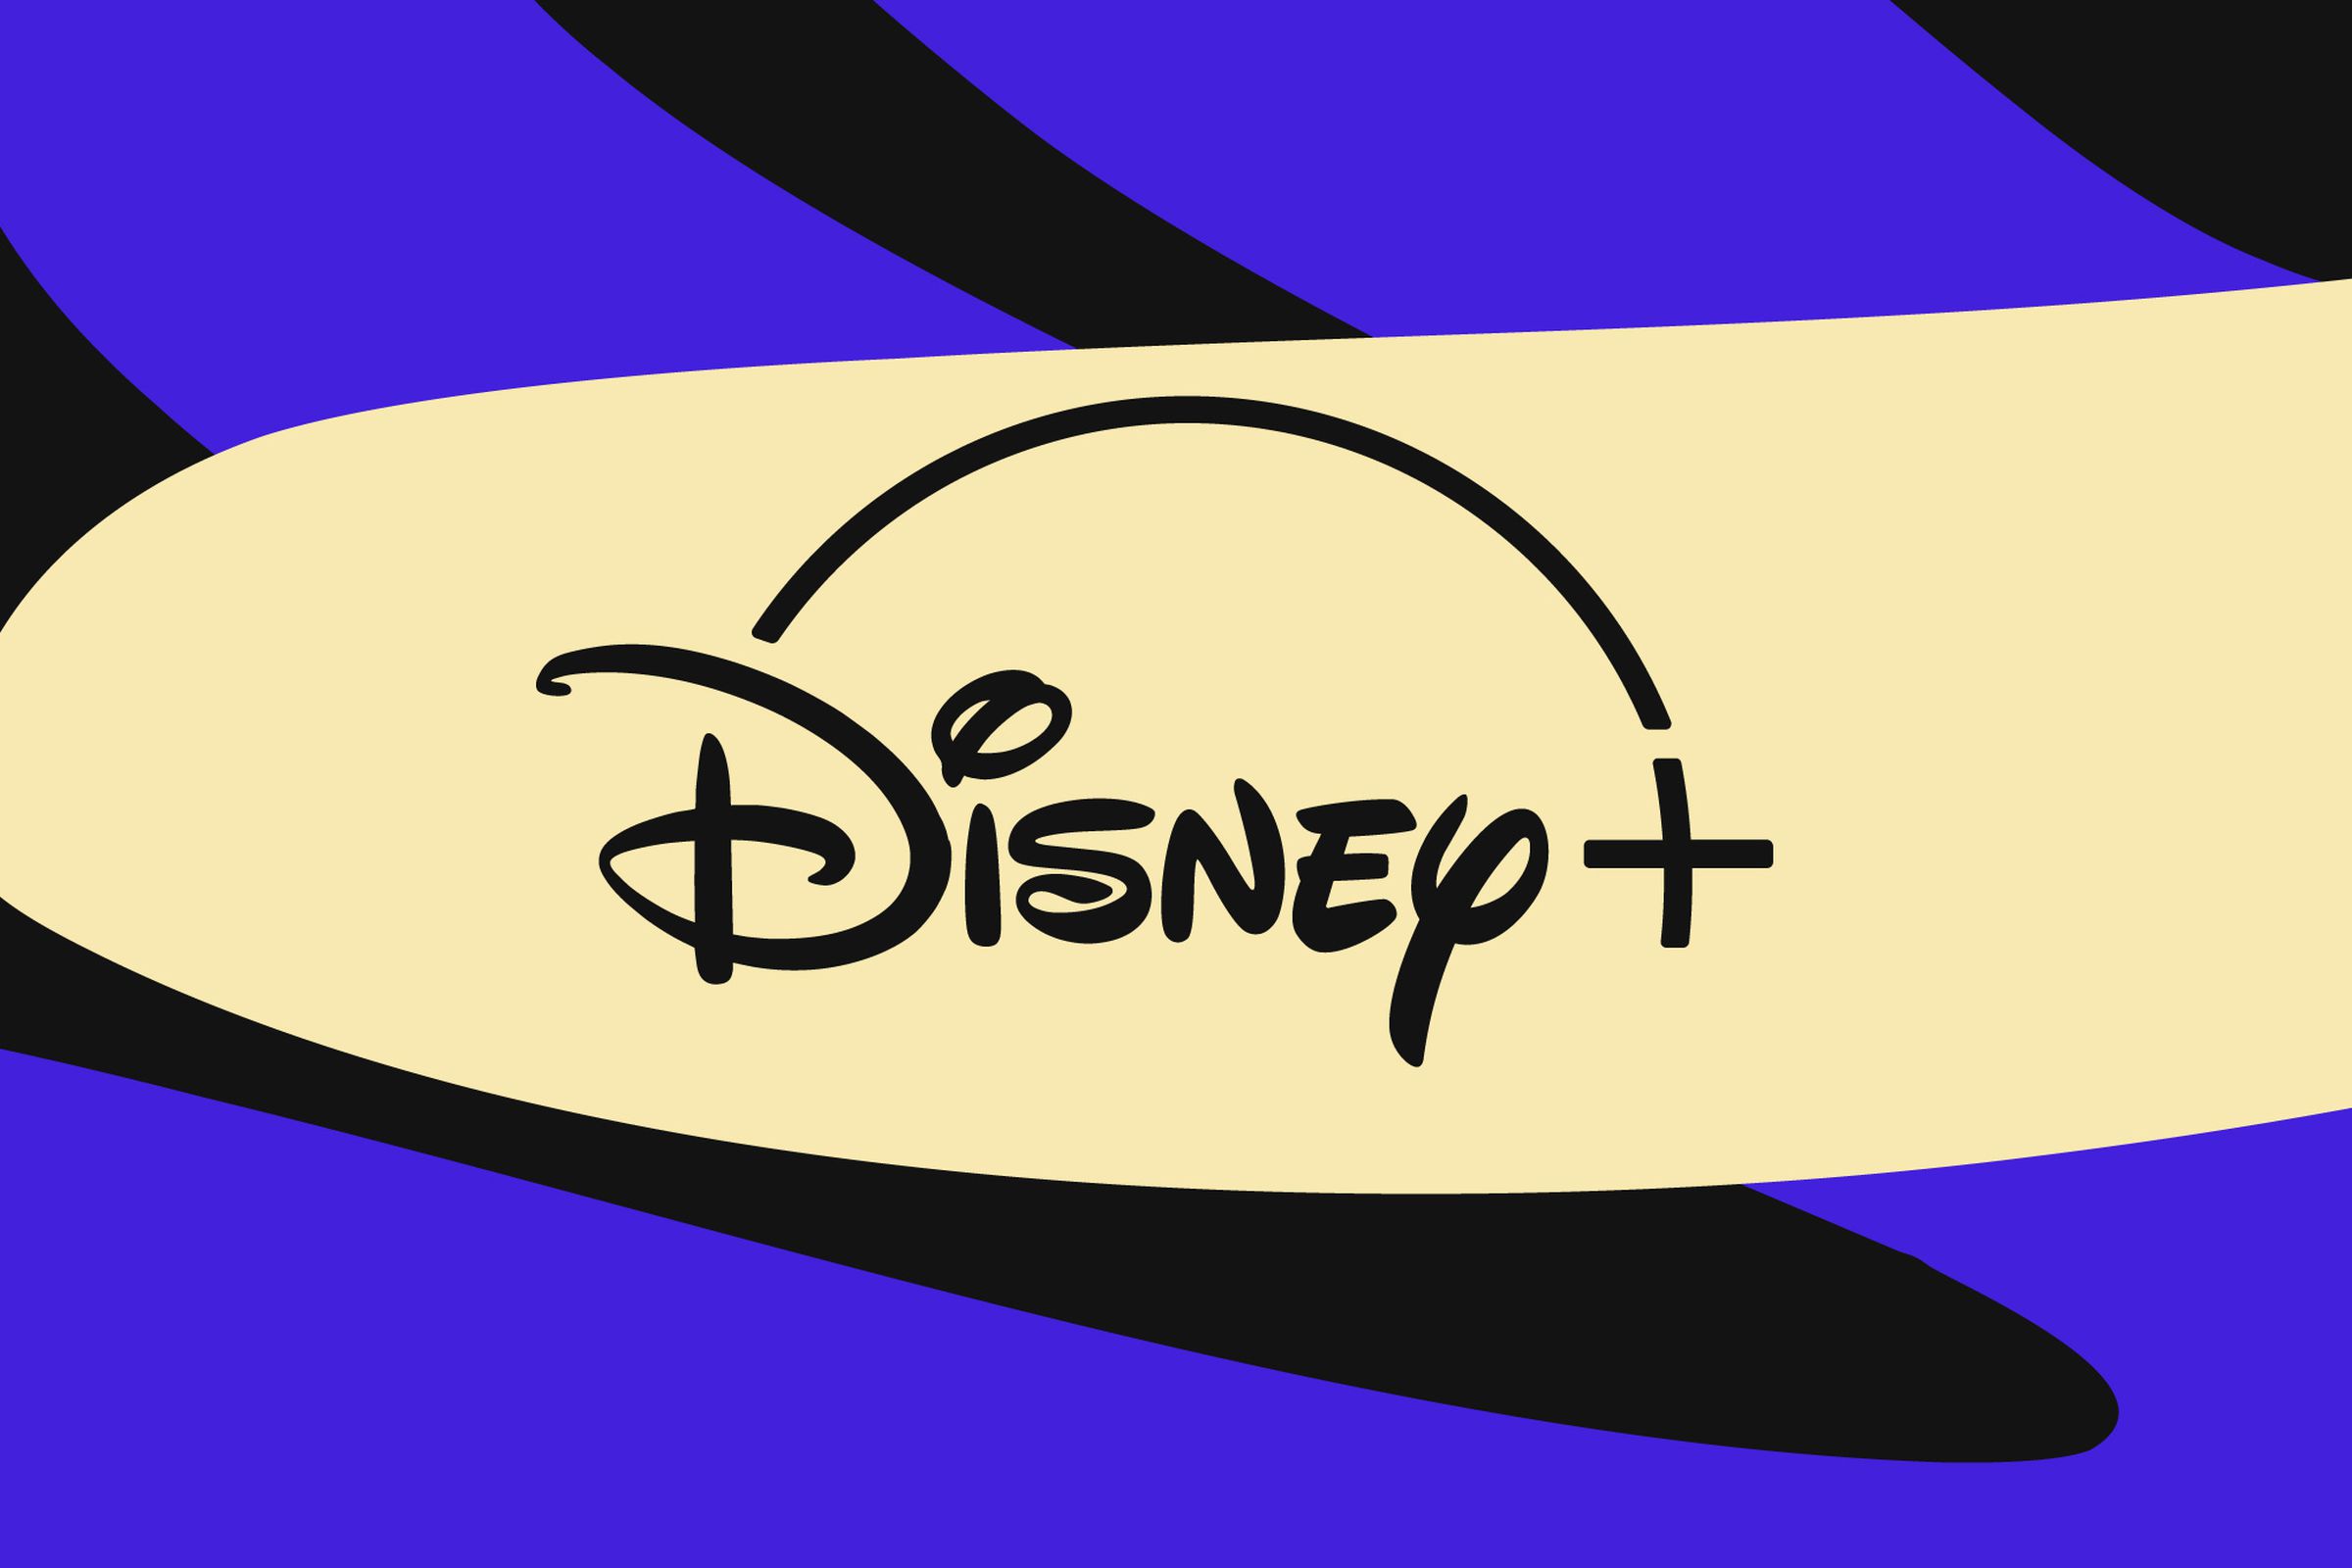 The Disney Plus logo on a beige and purple background